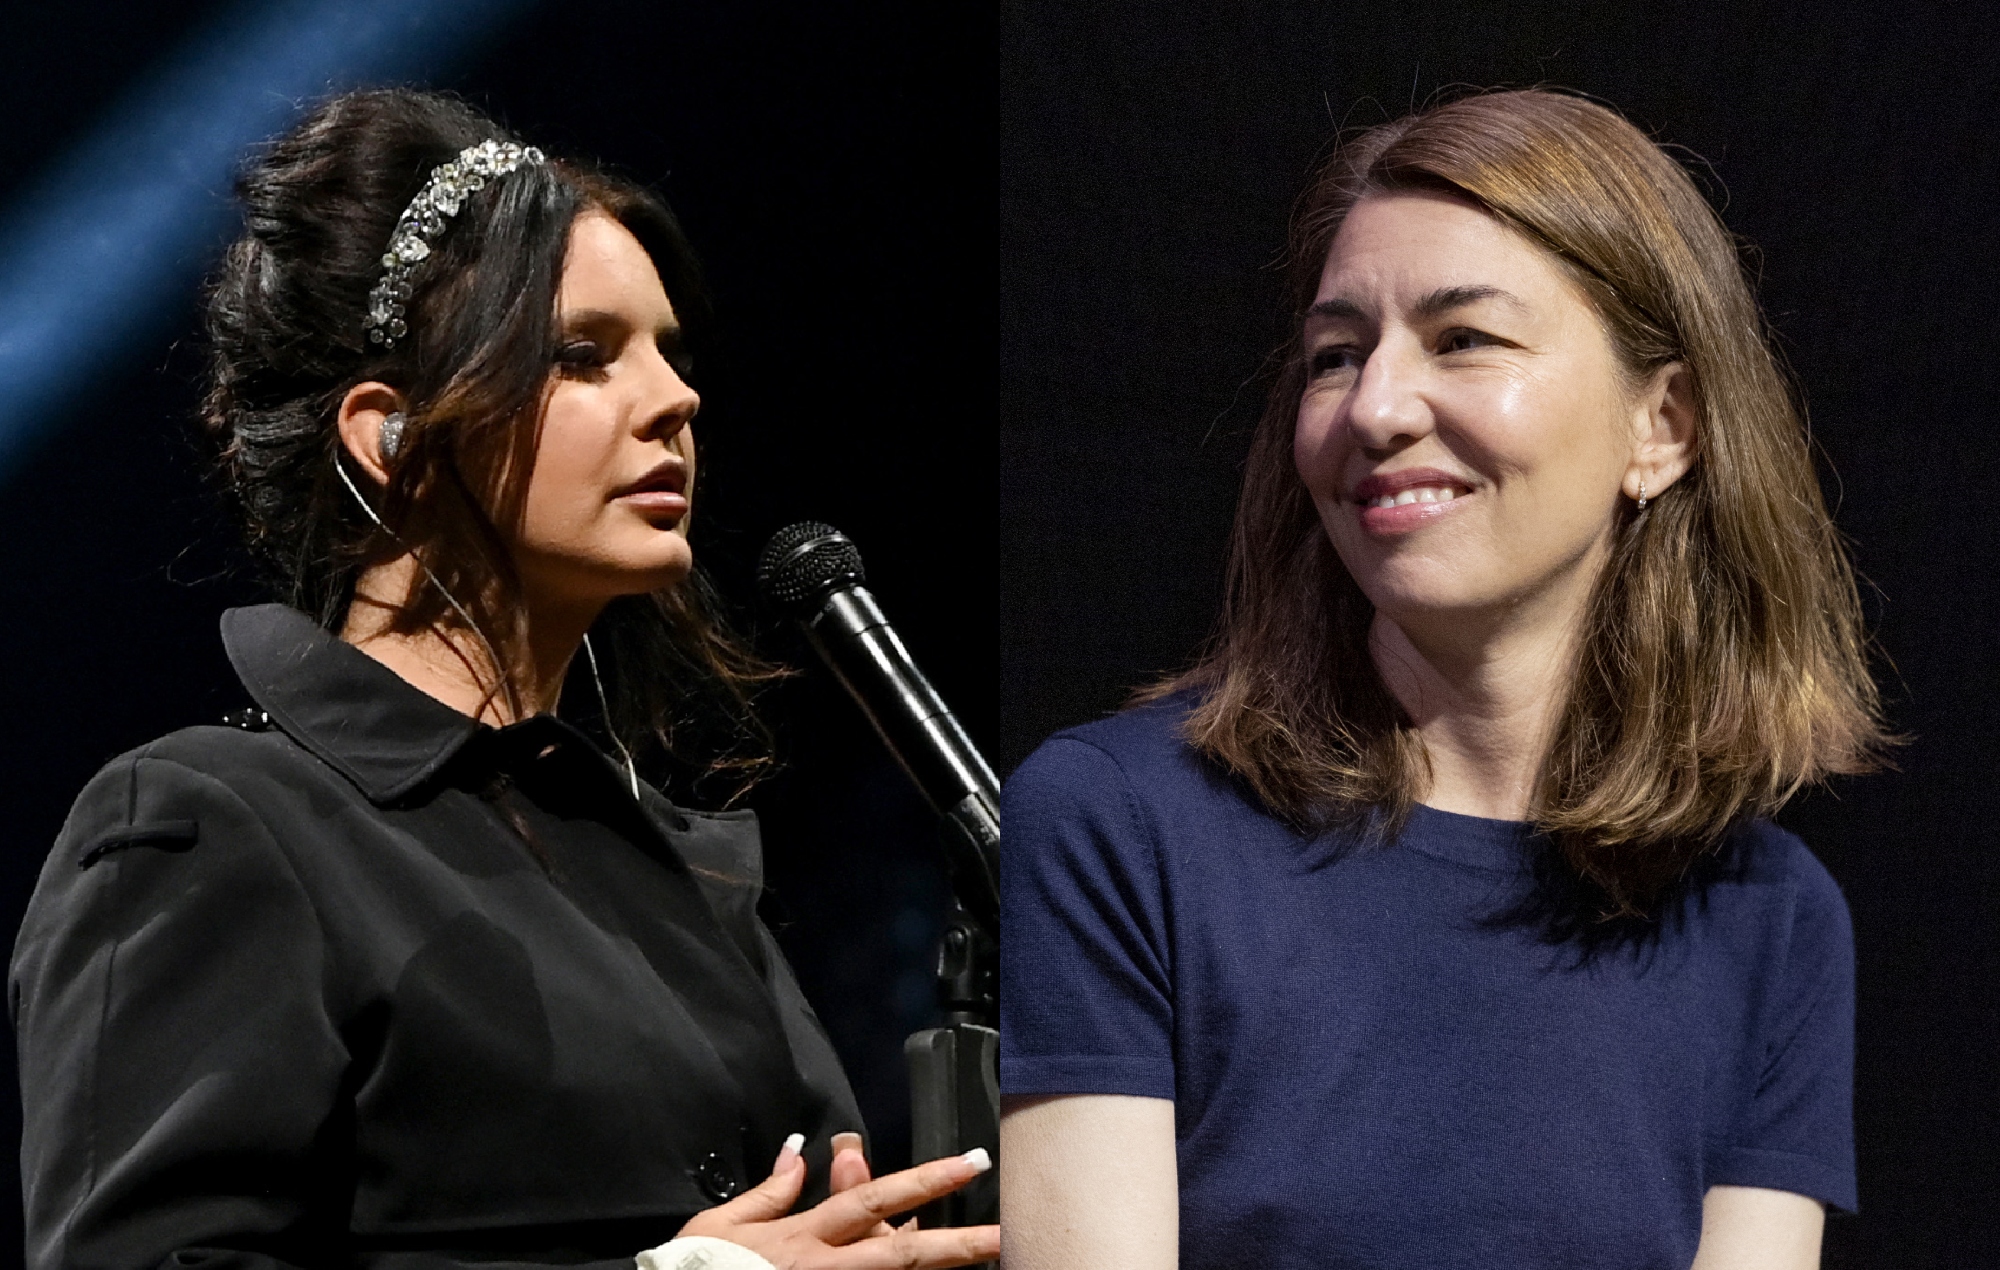 Sofia Coppola says Lana Del Rey was approached to write a song for ‘Priscilla’